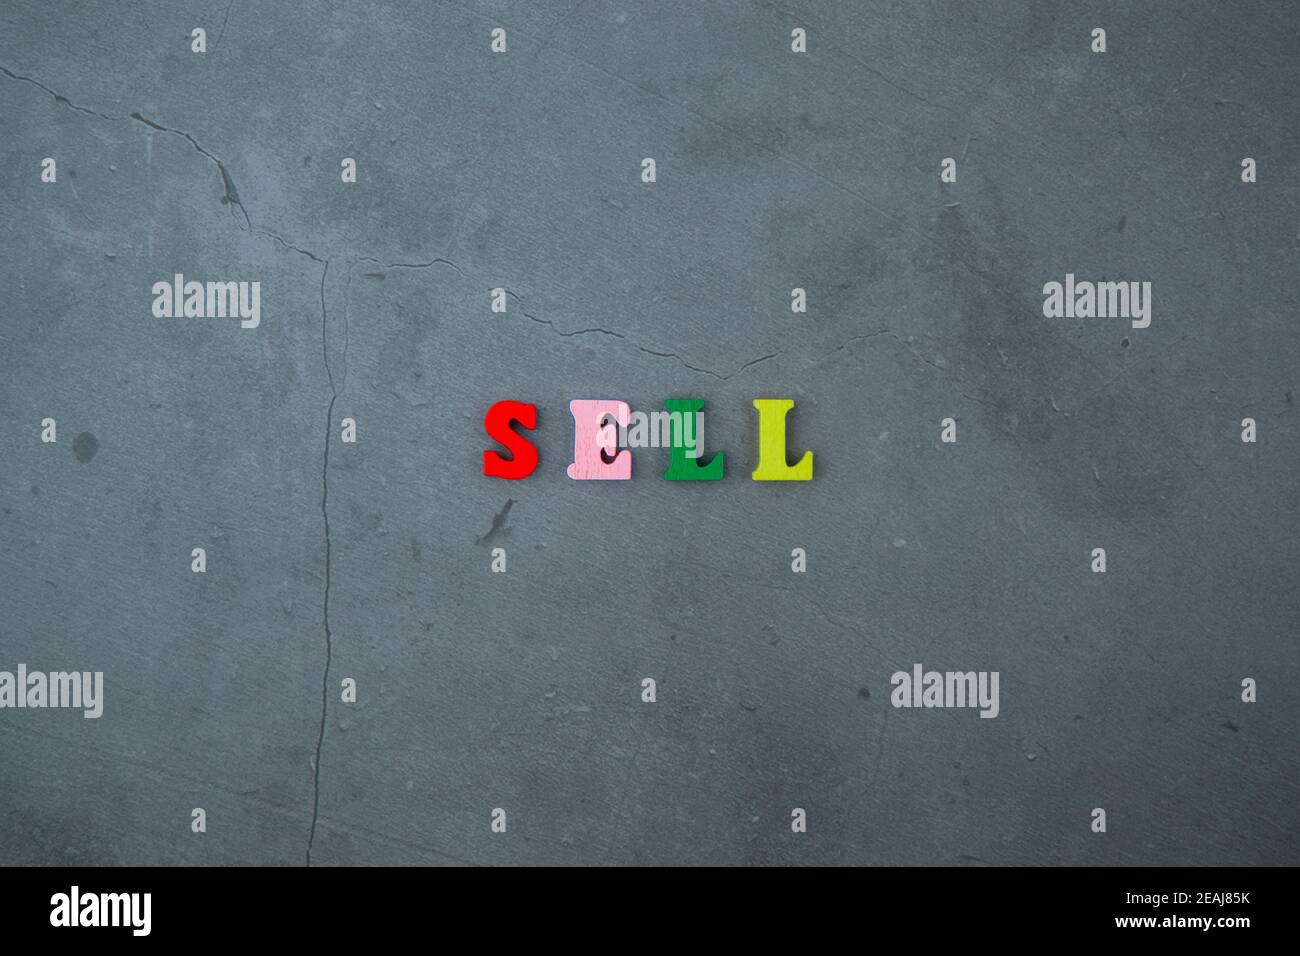 The multicolored sell word is made of wooden letters on a grey plastered wall background. Stock Photo